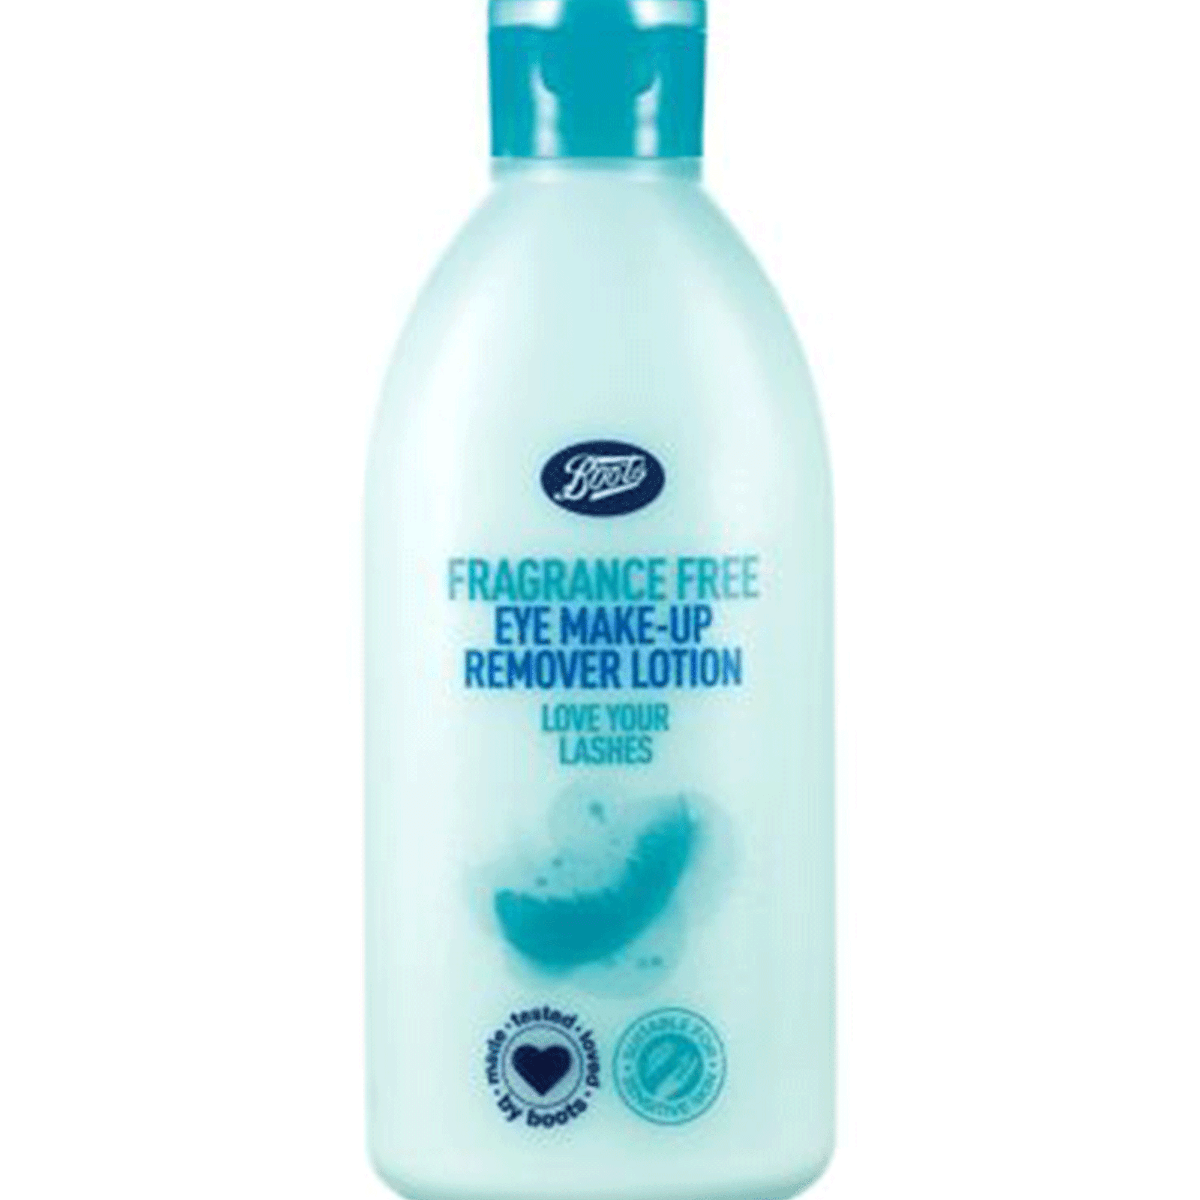 Boots Fragrance Free Eye Makeup Remover Lotion 150Ml - AllurebeautypkBoots Fragrance Free Eye Makeup Remover Lotion 150Ml